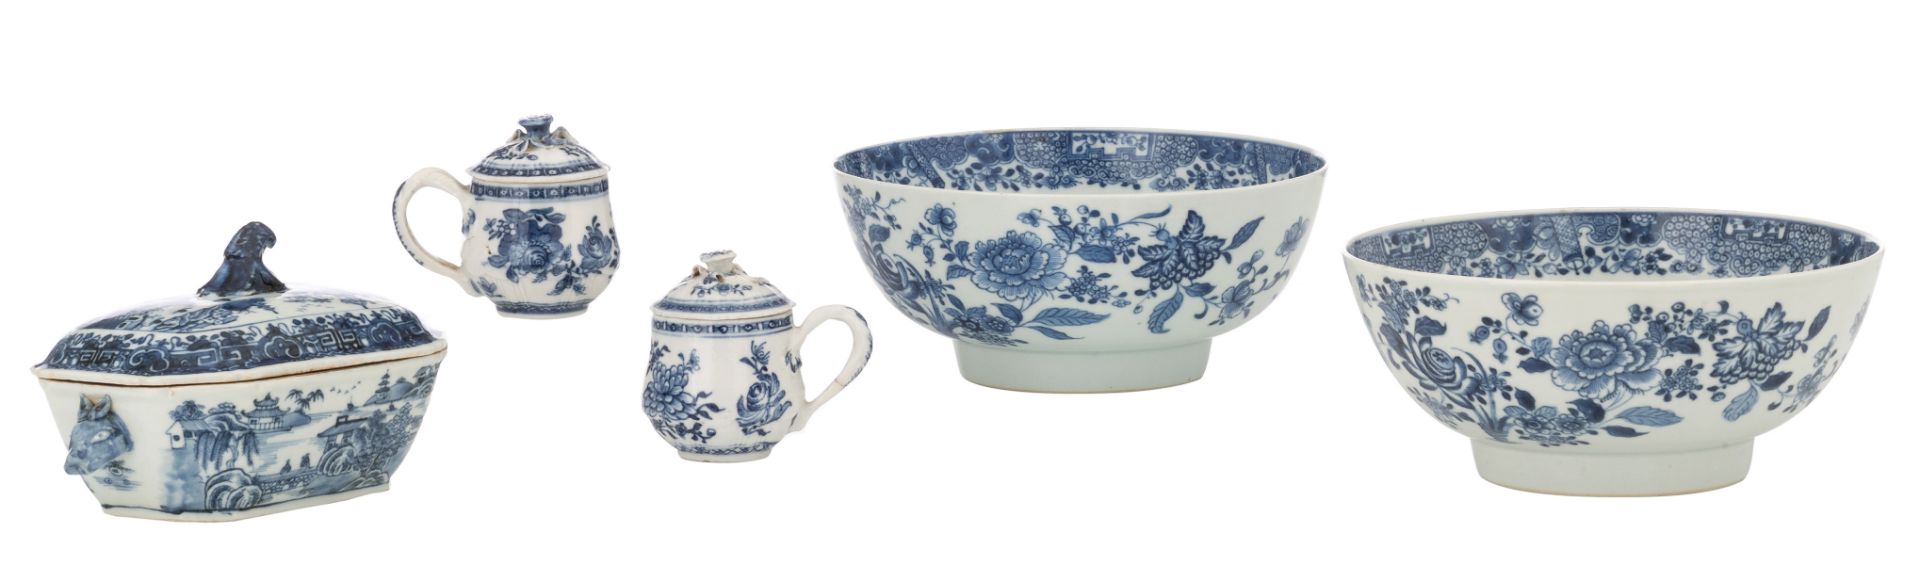 A lot of various Chinese blue and white porcelain items, consisting of two large bowls, a small ture